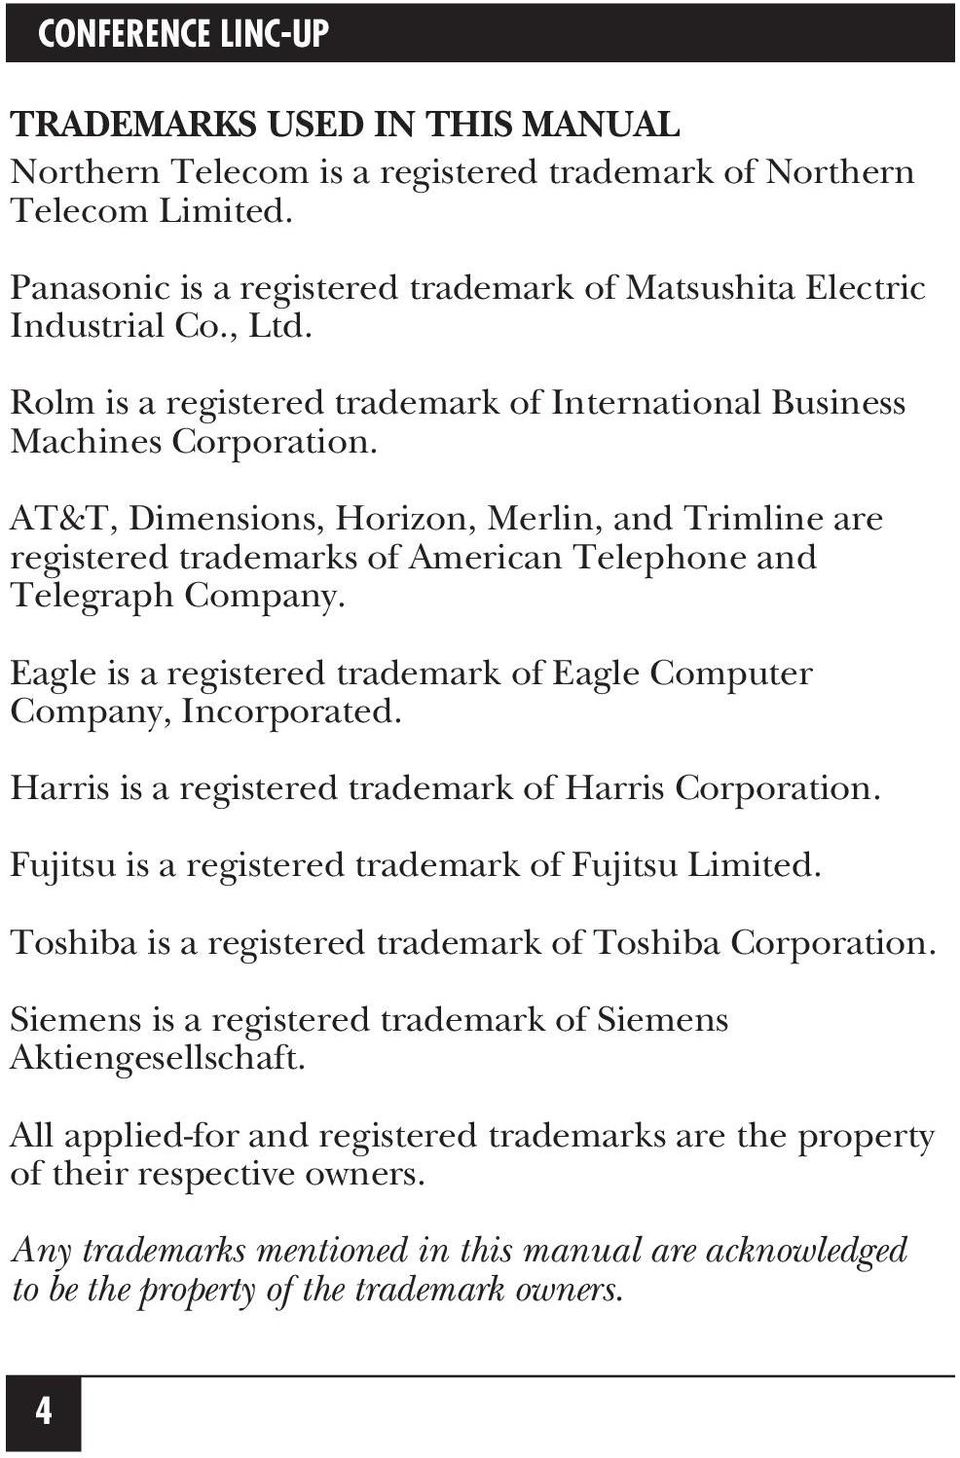 Eagle is a registered trademark of Eagle Computer Company, Incorporated. Harris is a registered trademark of Harris Corporation. Fujitsu is a registered trademark of Fujitsu Limited.